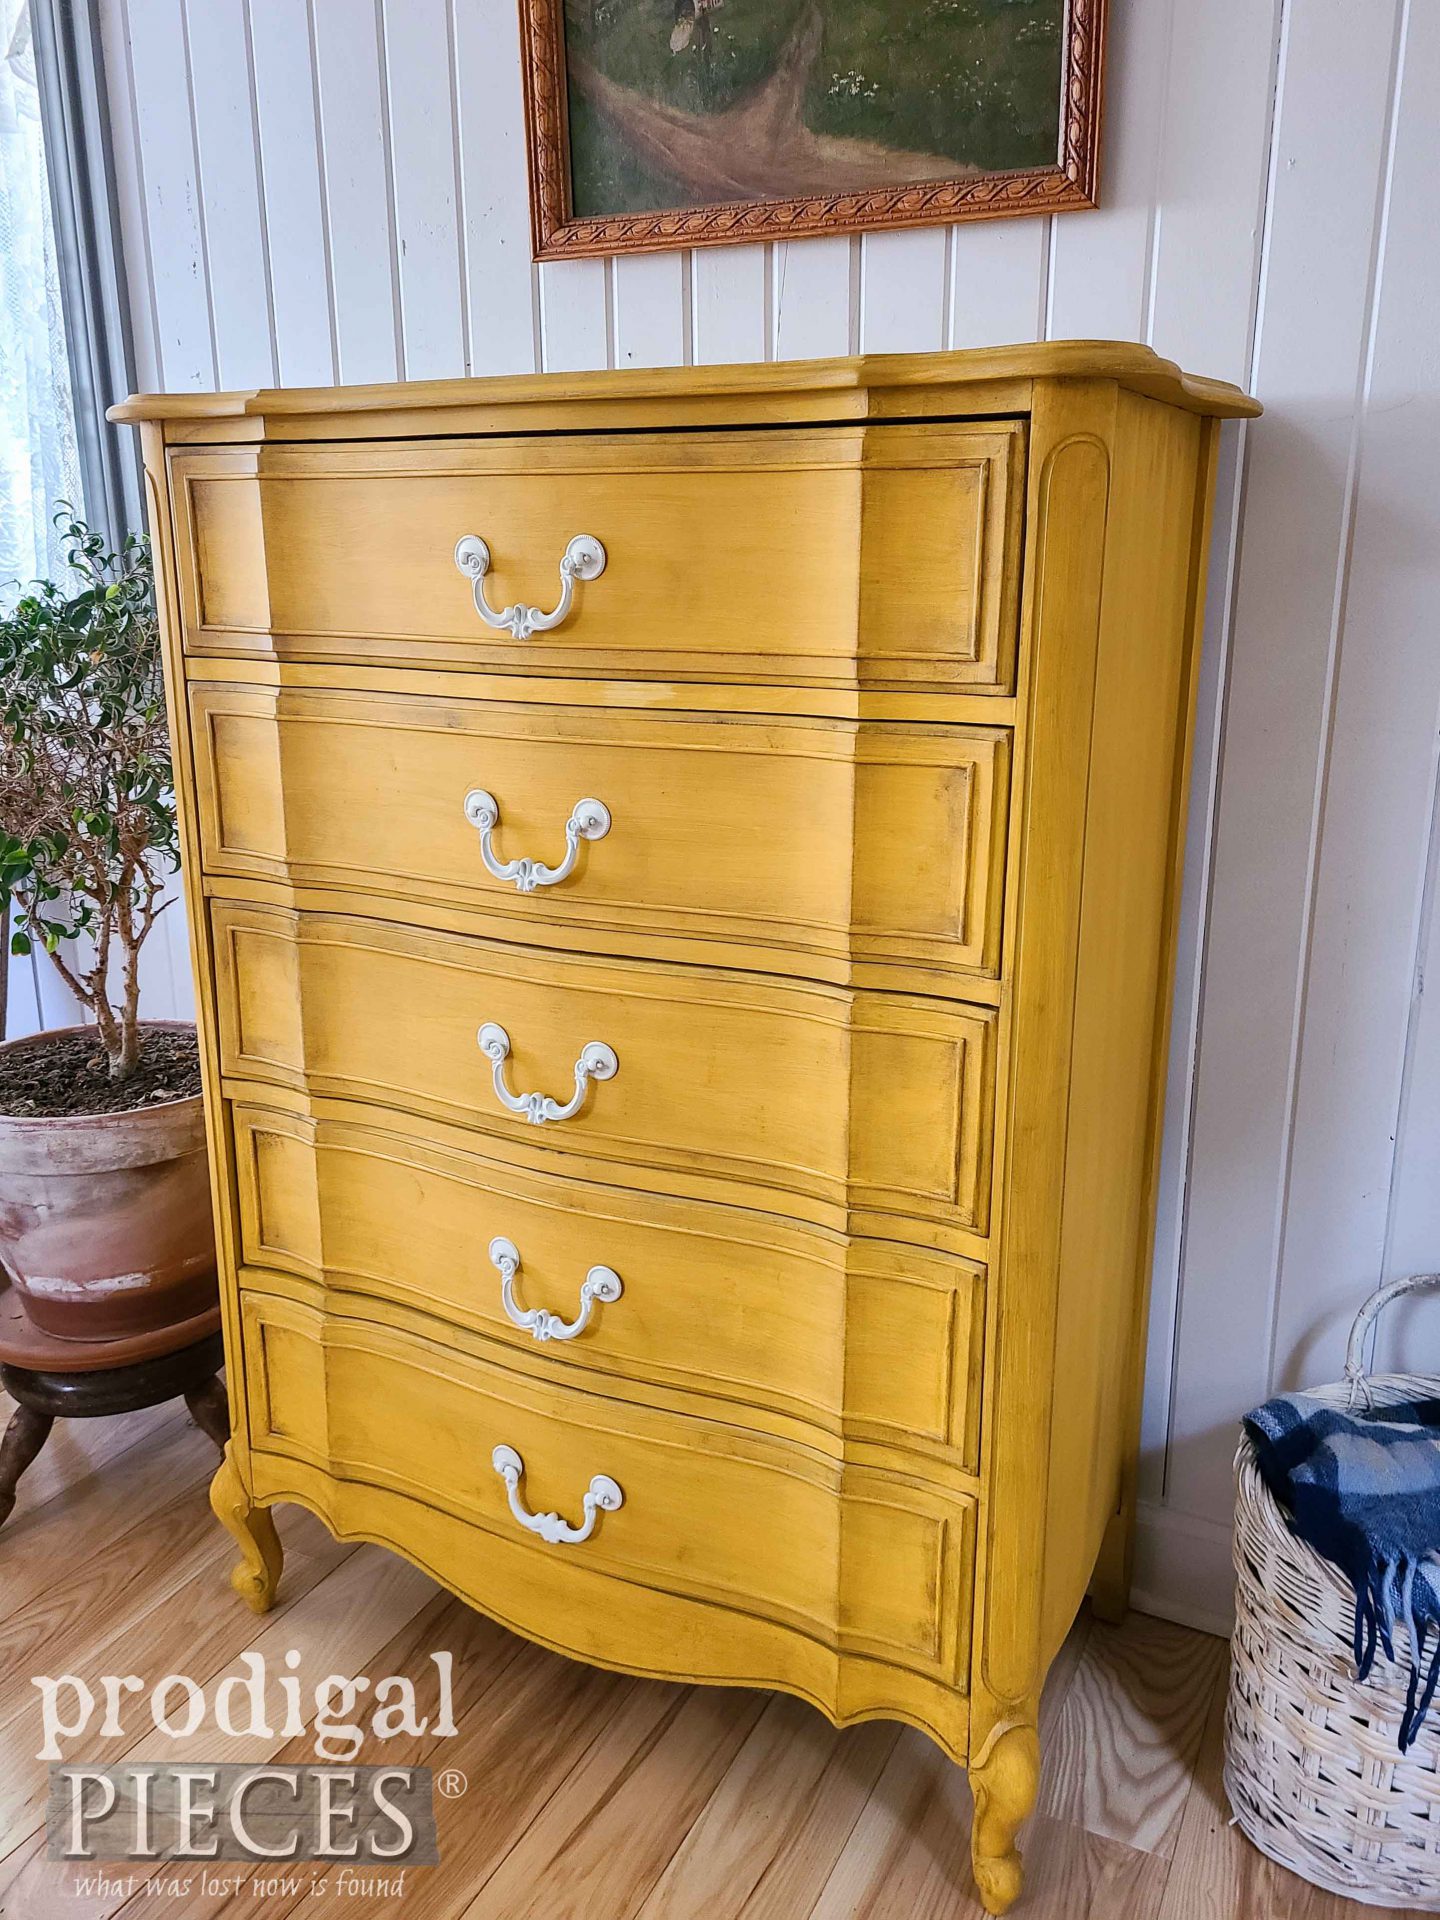 Vintage Yellow Chest of Drawers by Larissa of Prodigal Pieces | prodigalpieces.com #prodigalpieces #yellow #furniture